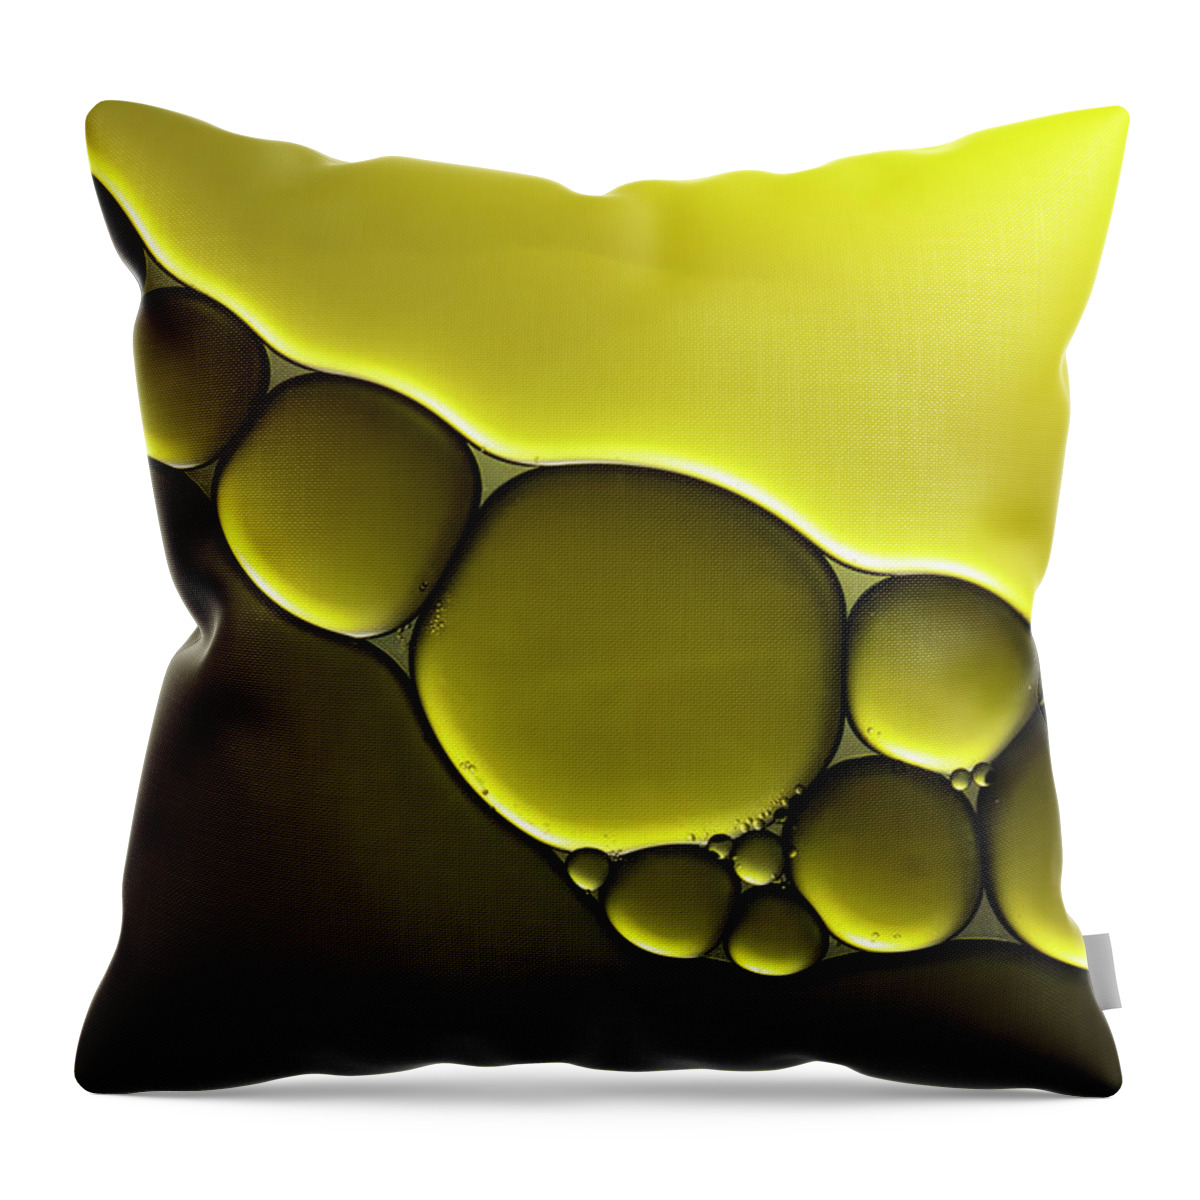 Research Throw Pillow featuring the photograph Oil & Water - Abstract Background by Thomasvogel